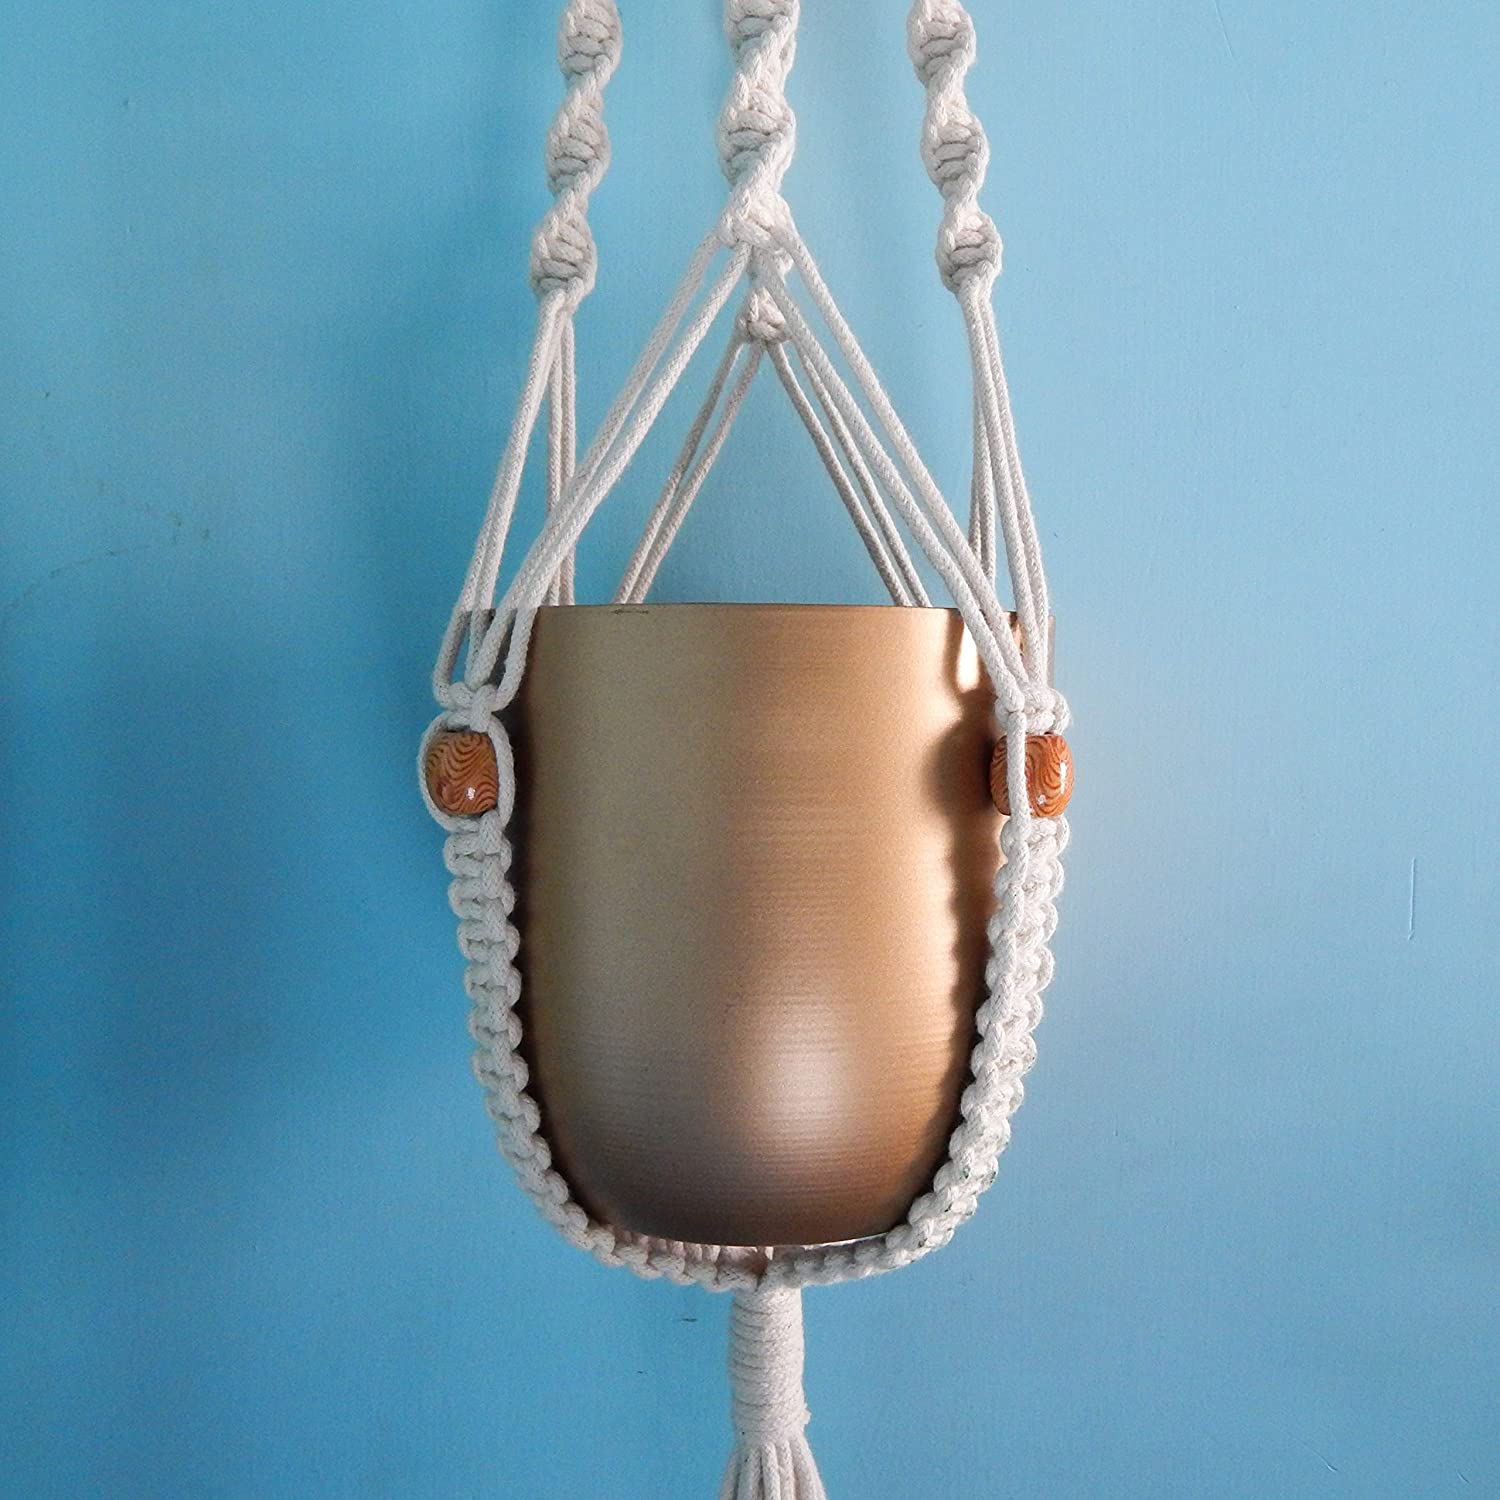 Ecofynd Macrame Cotton Plant Hanger with Gold Metal Pot Macrame Plant Hanger freeshipping - Ecofynd